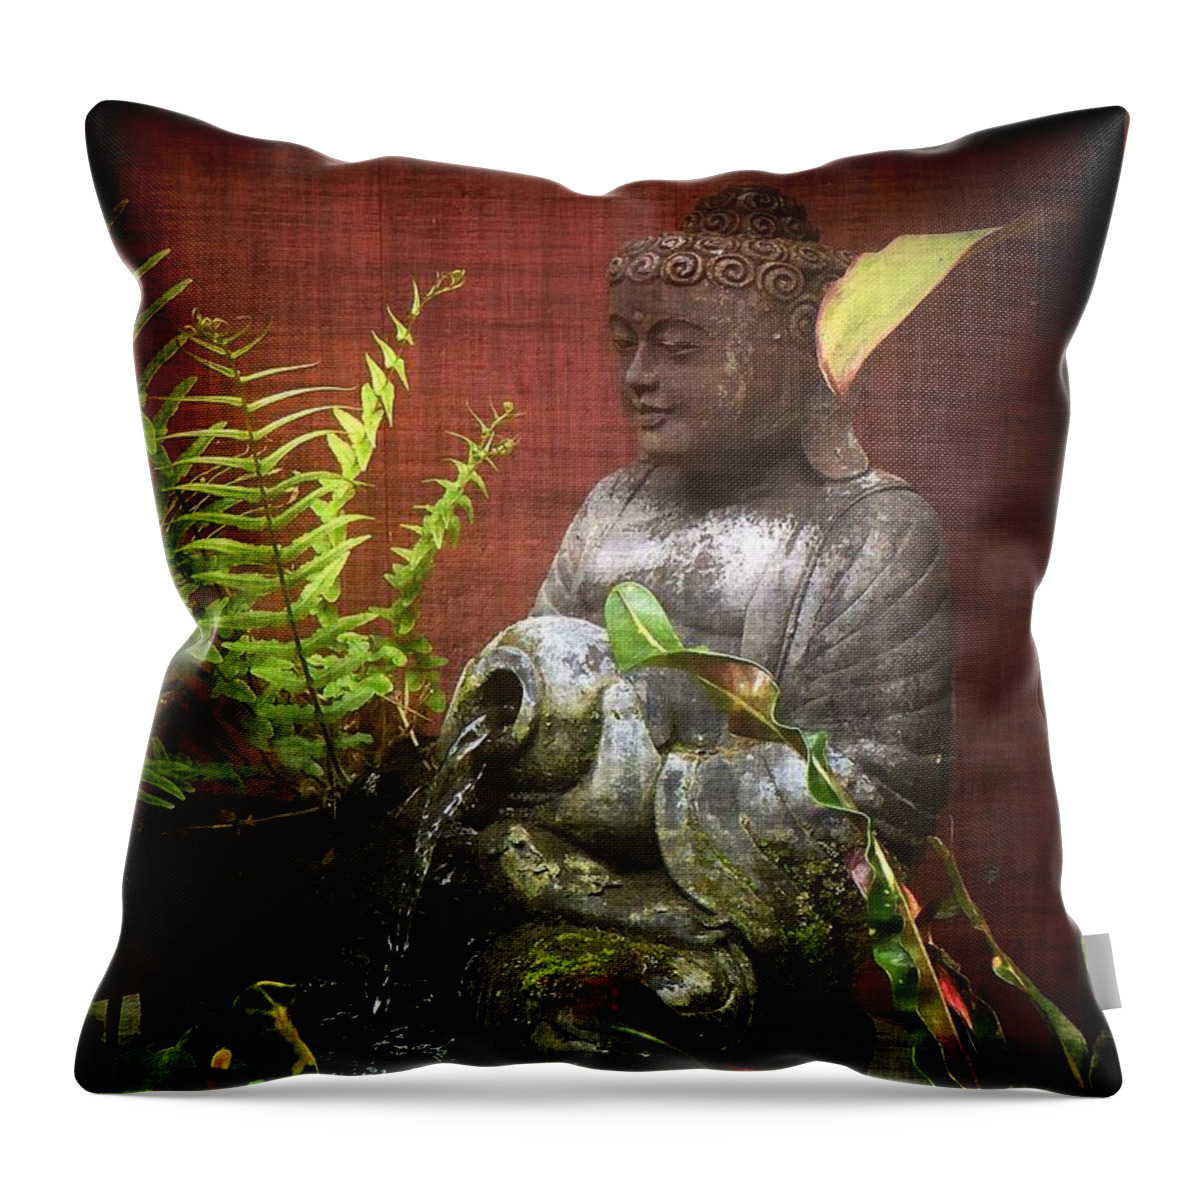 Buddhist Throw Pillow featuring the photograph Serenity Fountain by Lori Seaman